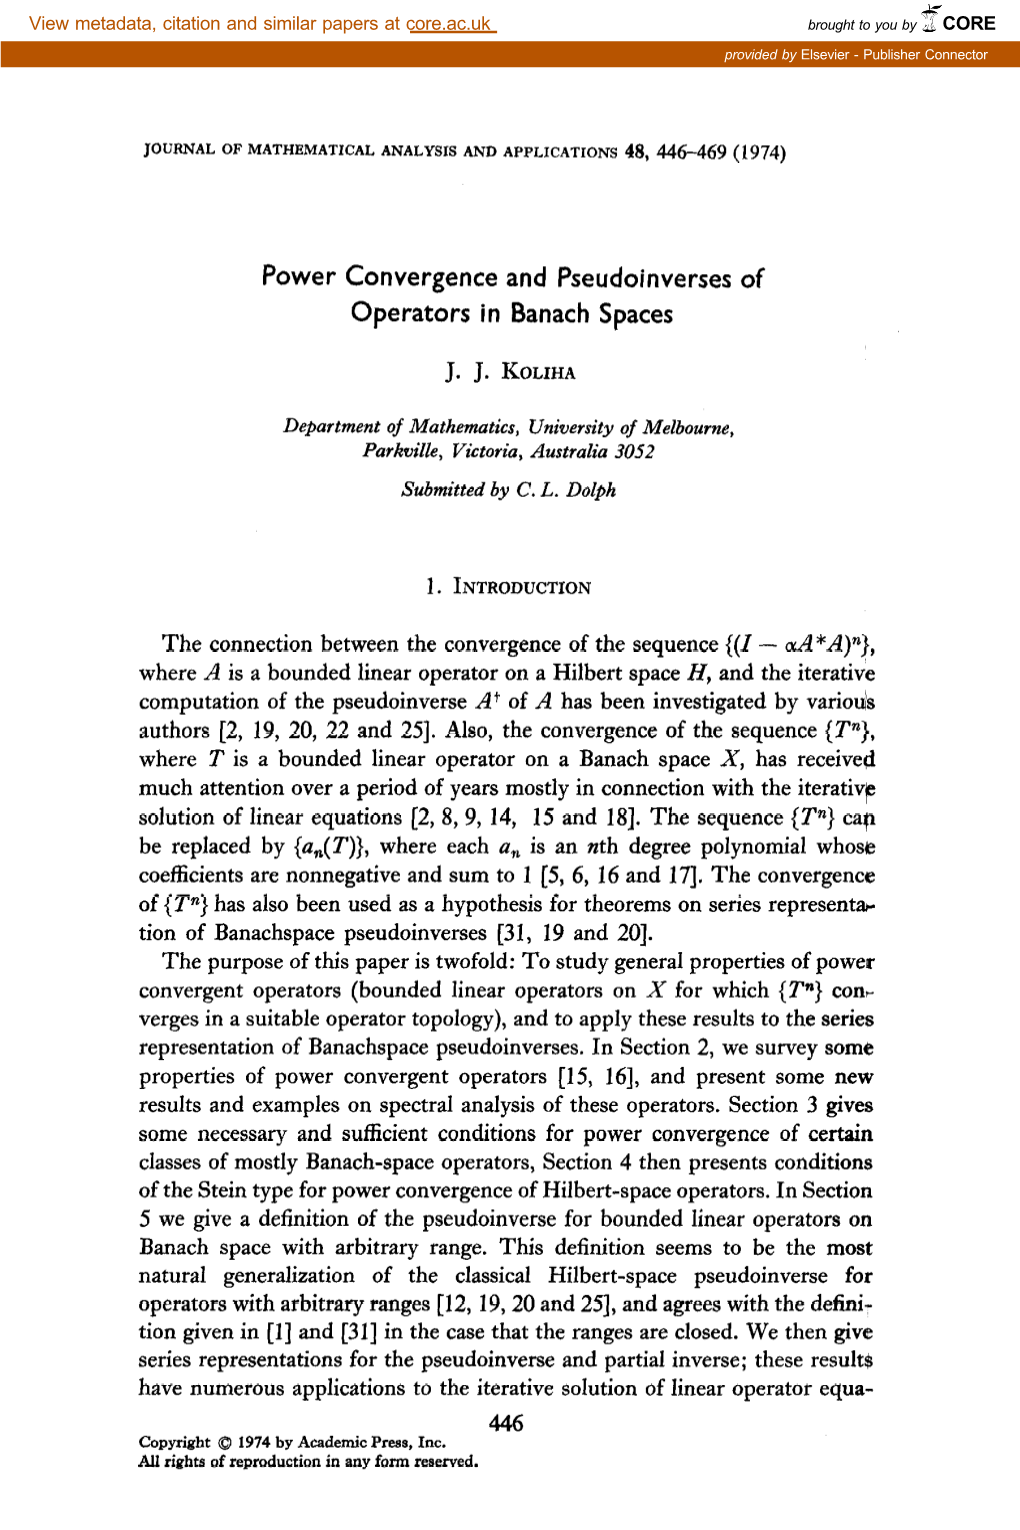 Power Convergence and Pseudoinverses of Operators in Banach Spaces